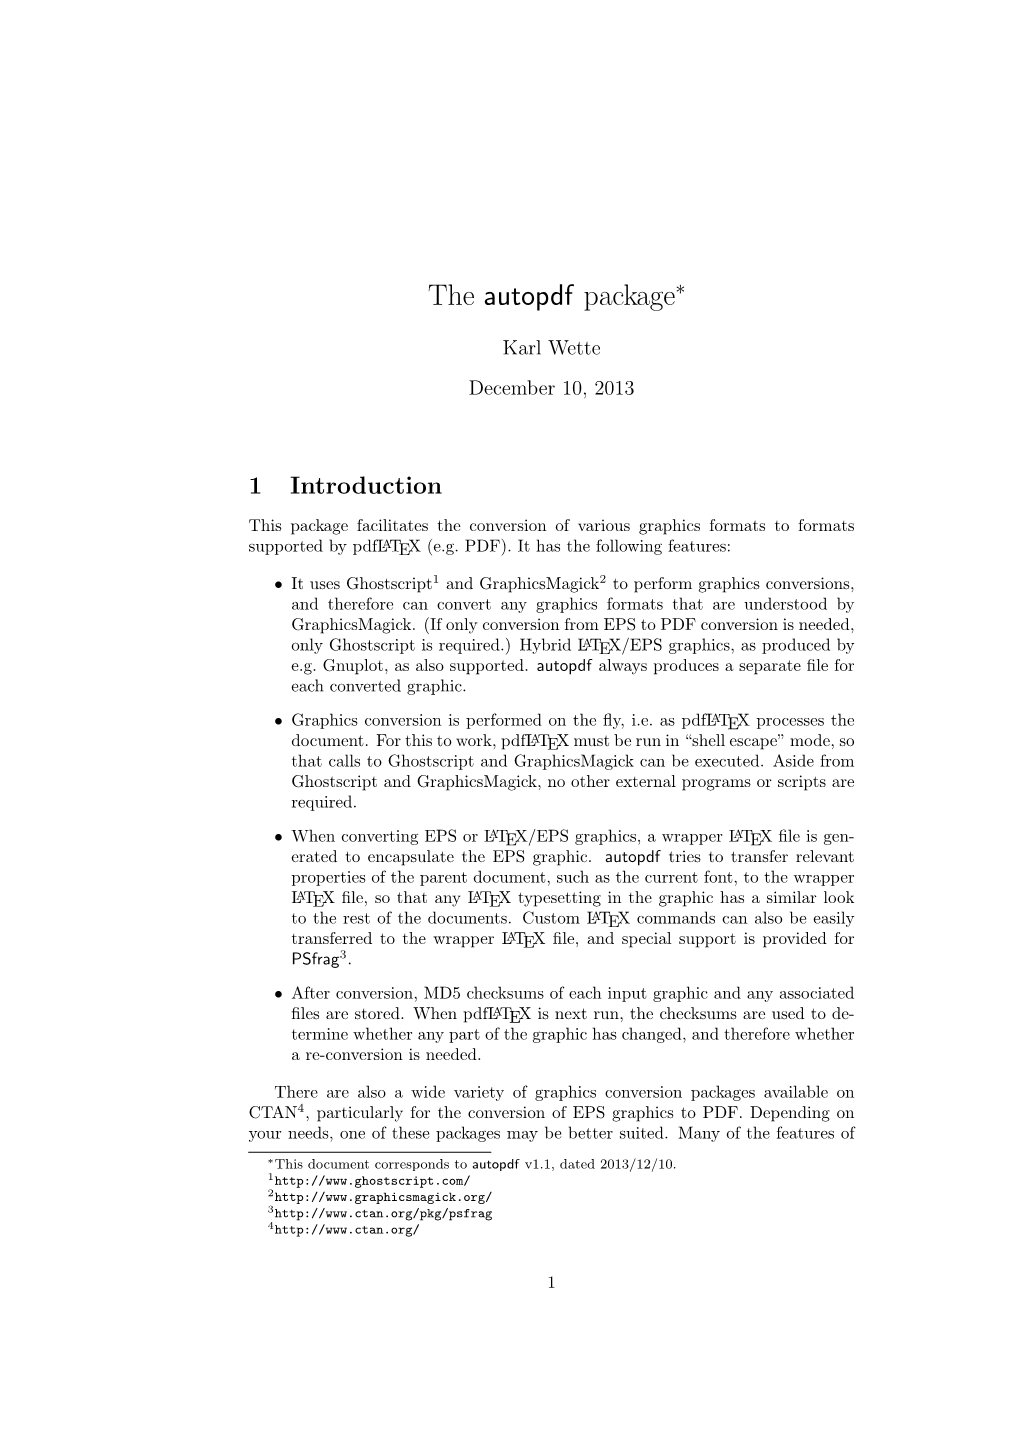 The Autopdf Package∗